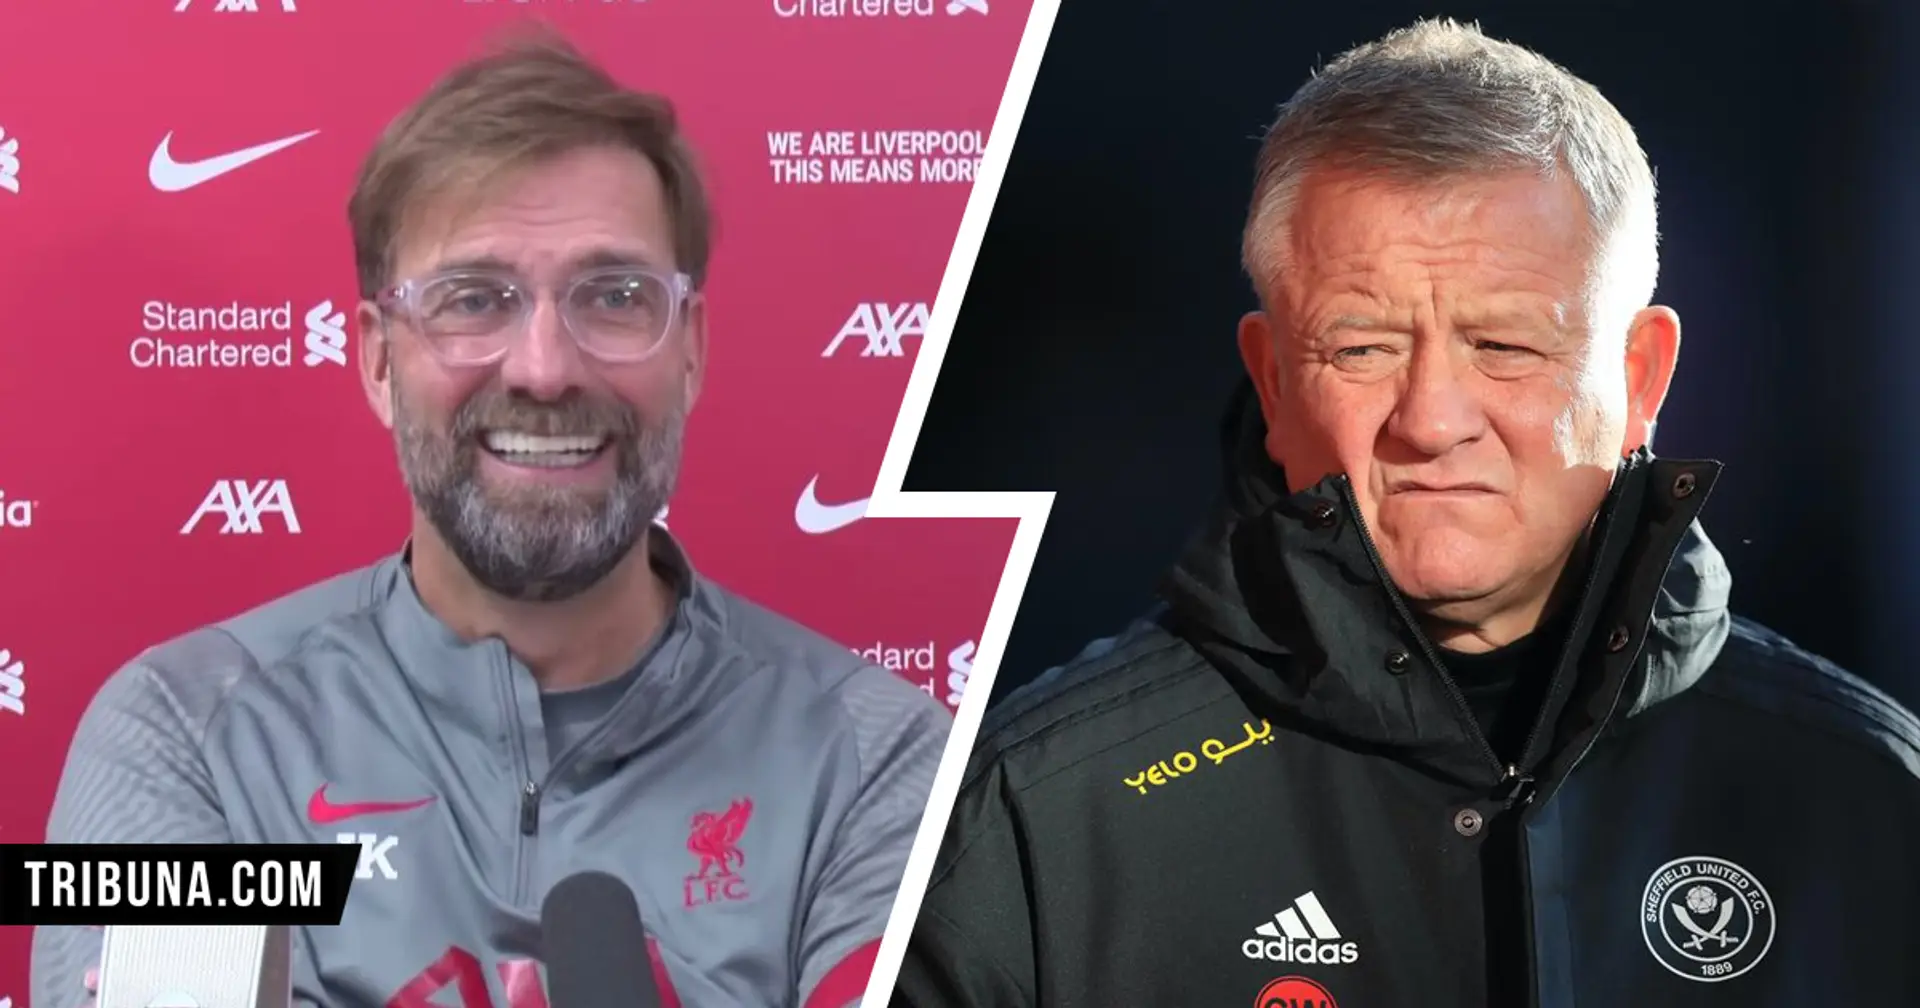 Jurgen Klopp takes another dig at Chris Wilder as he discusses if fans' return will help improve results